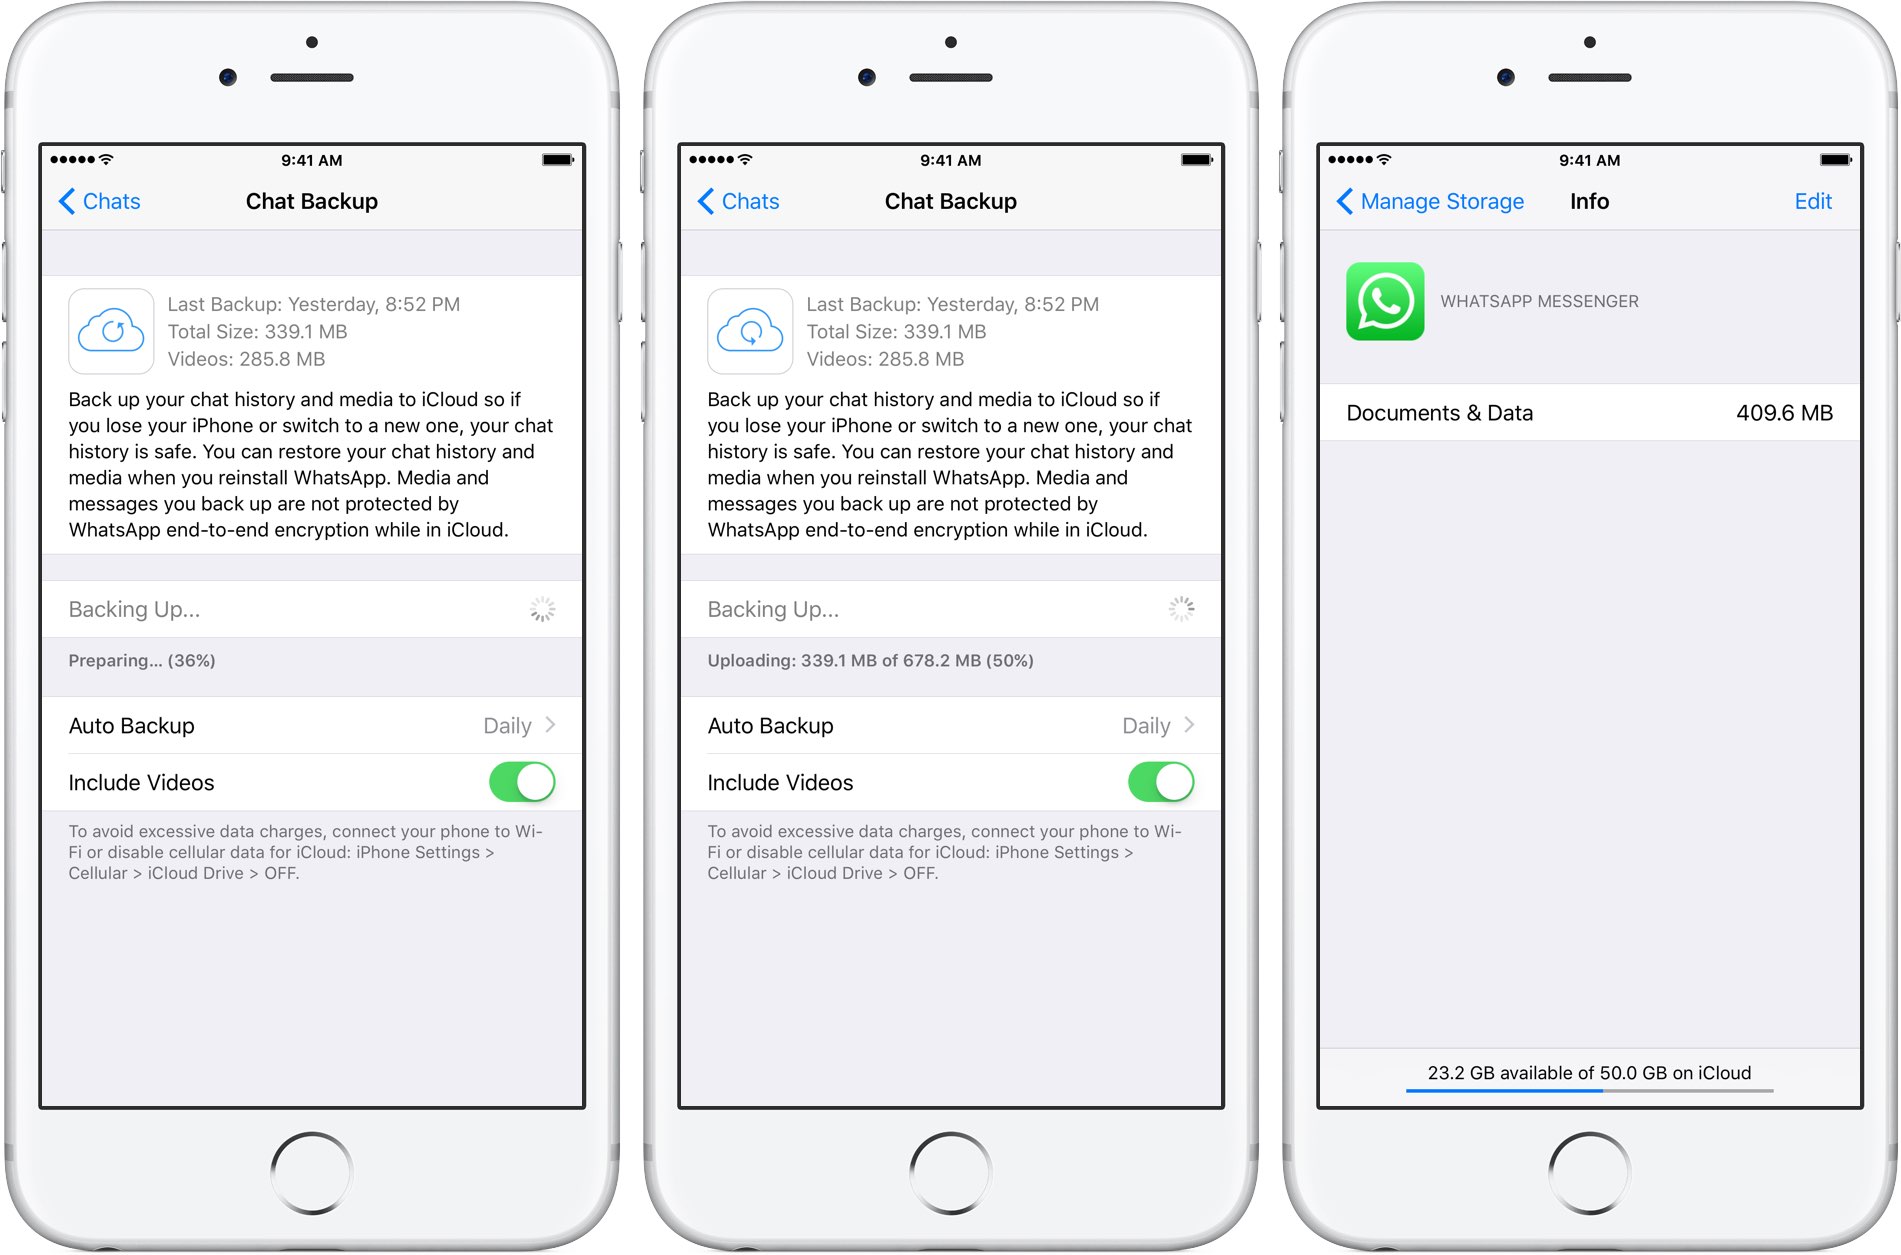 Whatsapp Quietly Added Encryption To Icloud Backups In Late 2016